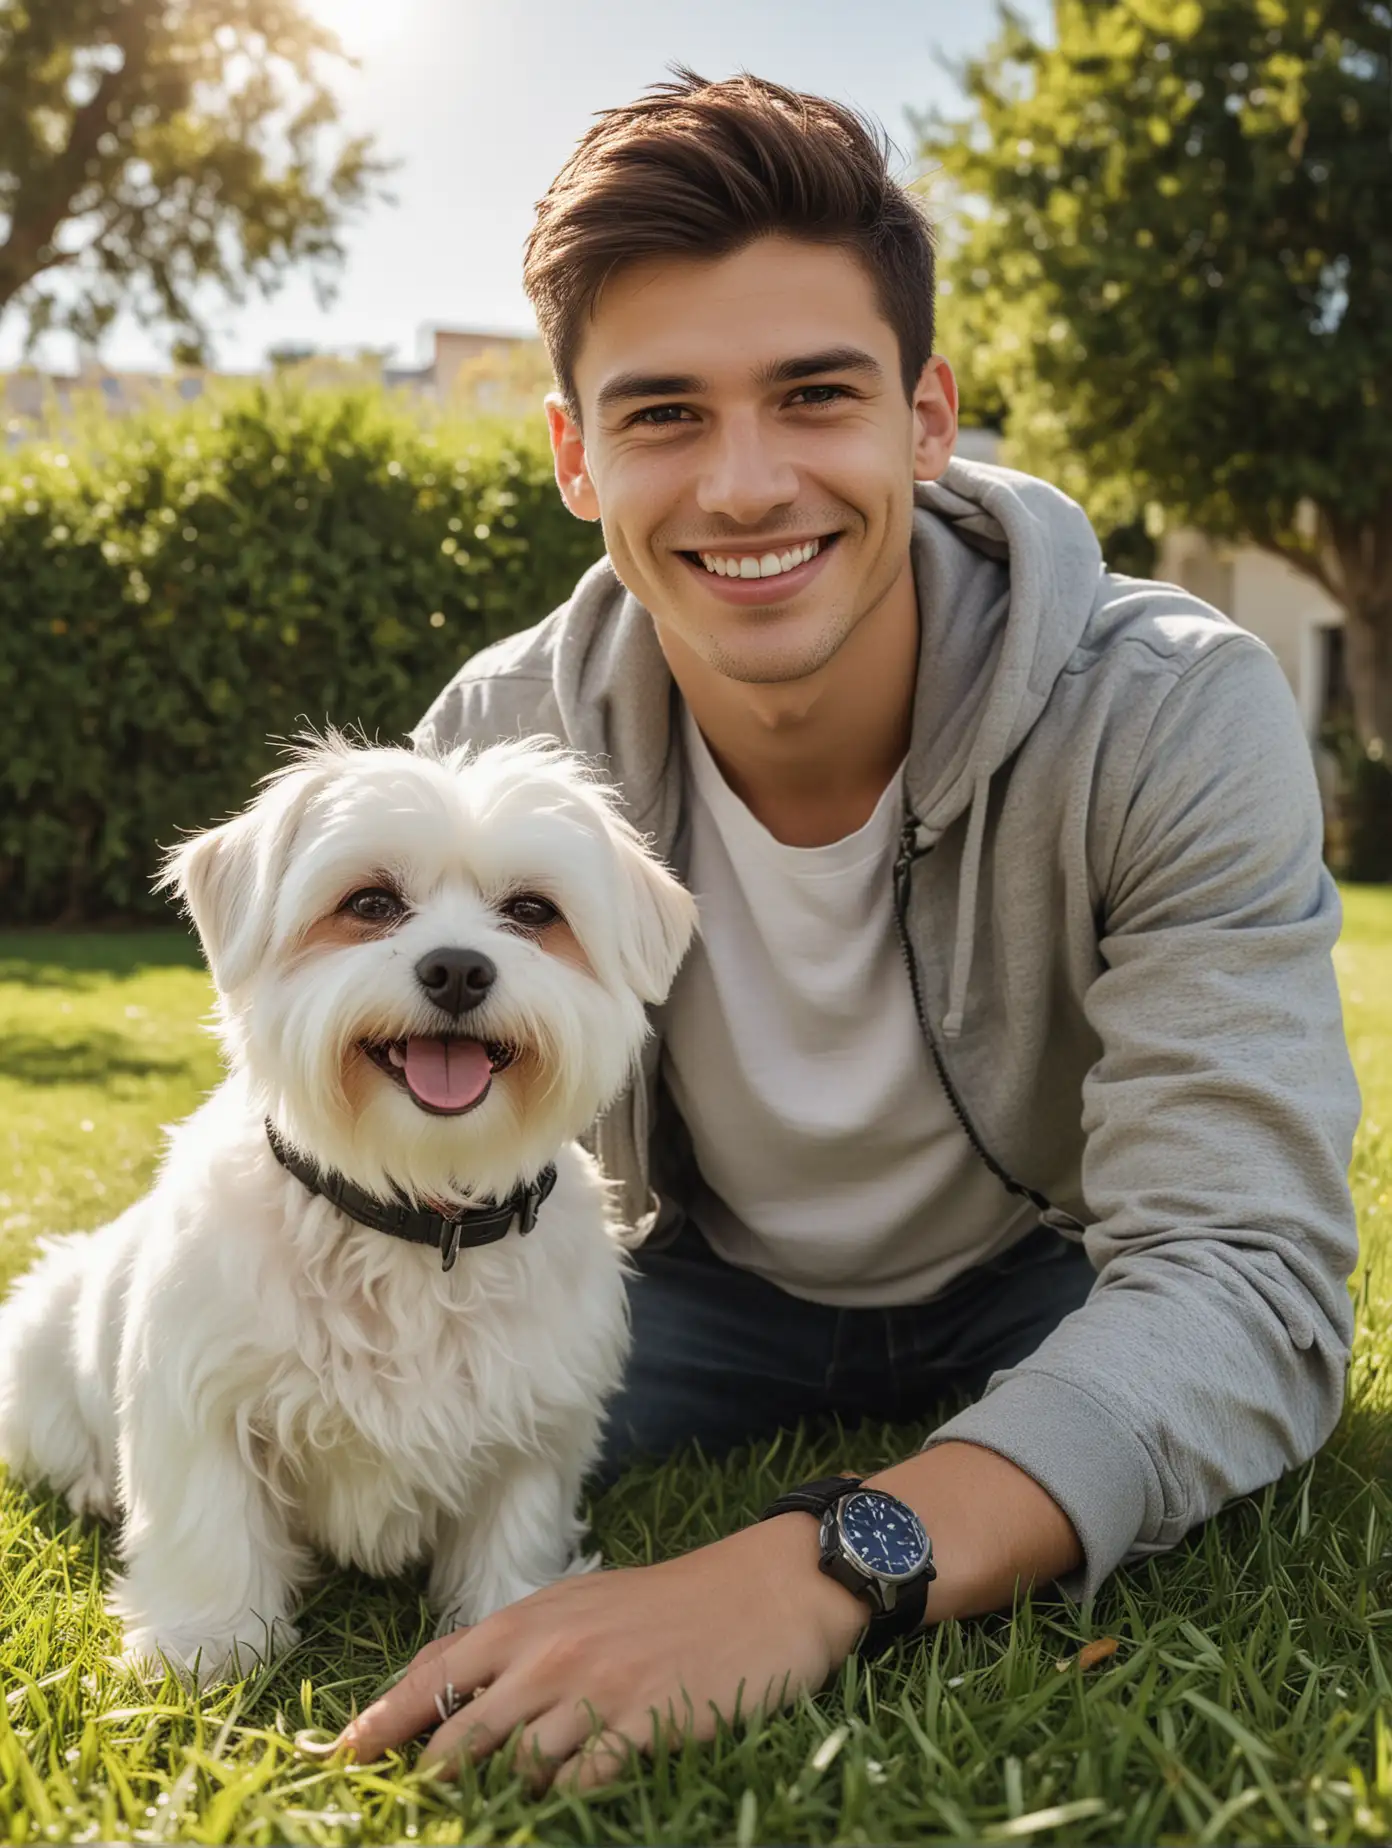 European and American, a handsome young man smiles for the camera and takes a photo with a Maltese dog on the grass outdoors on a sunny day. This photo was shot Sony A7c style using a 35mm f/2 lens for a realistic look.